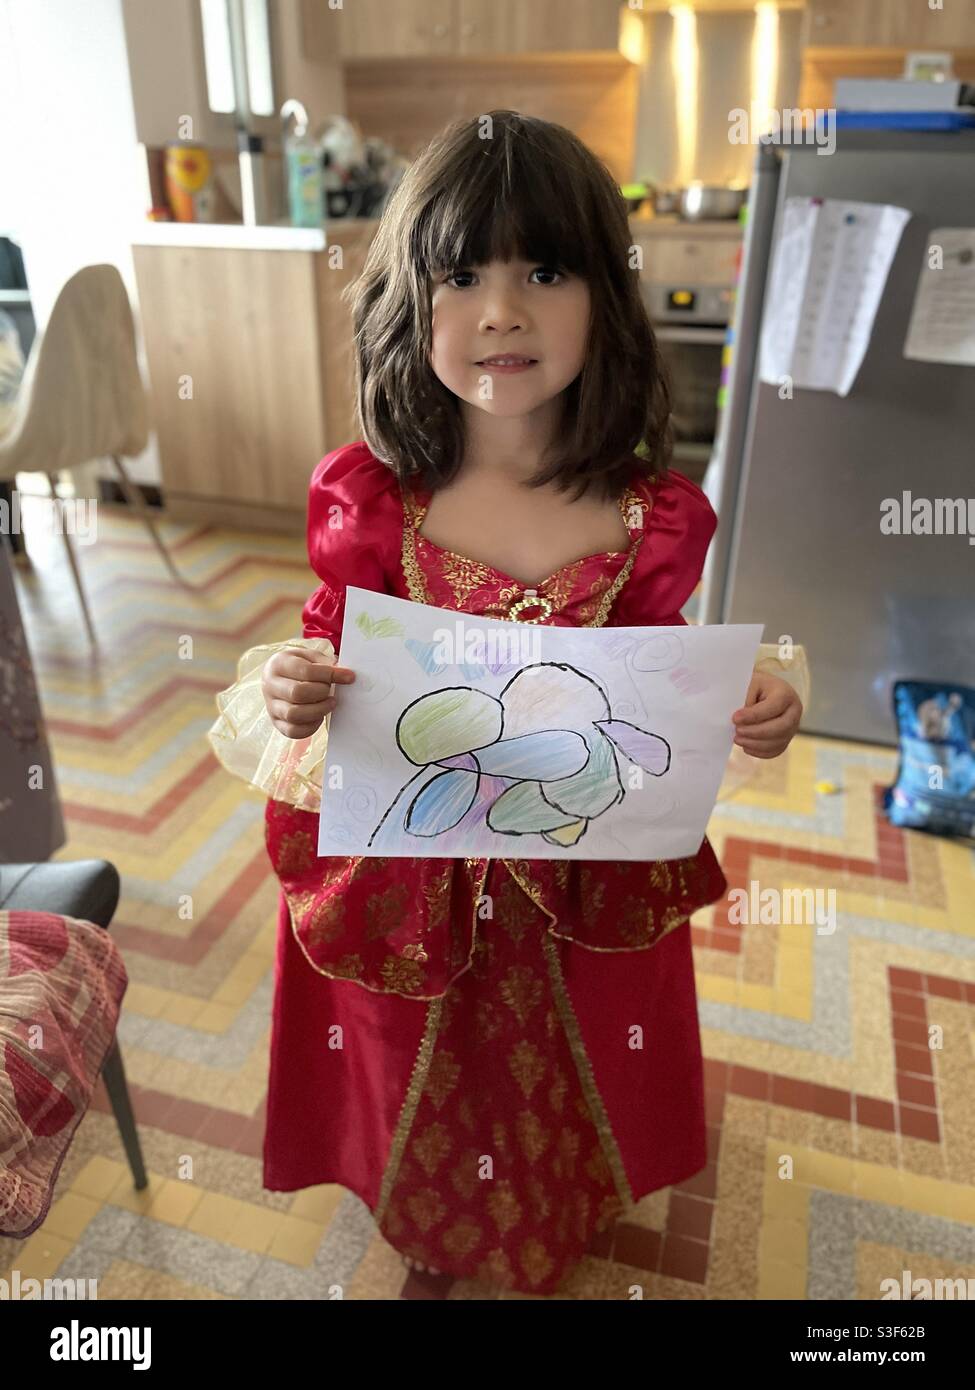 Beautiful and cute mixed Asian little girl with long brown hair wearing a red dress with gold trim holding a nice colour drawing, smiling Stock Photo